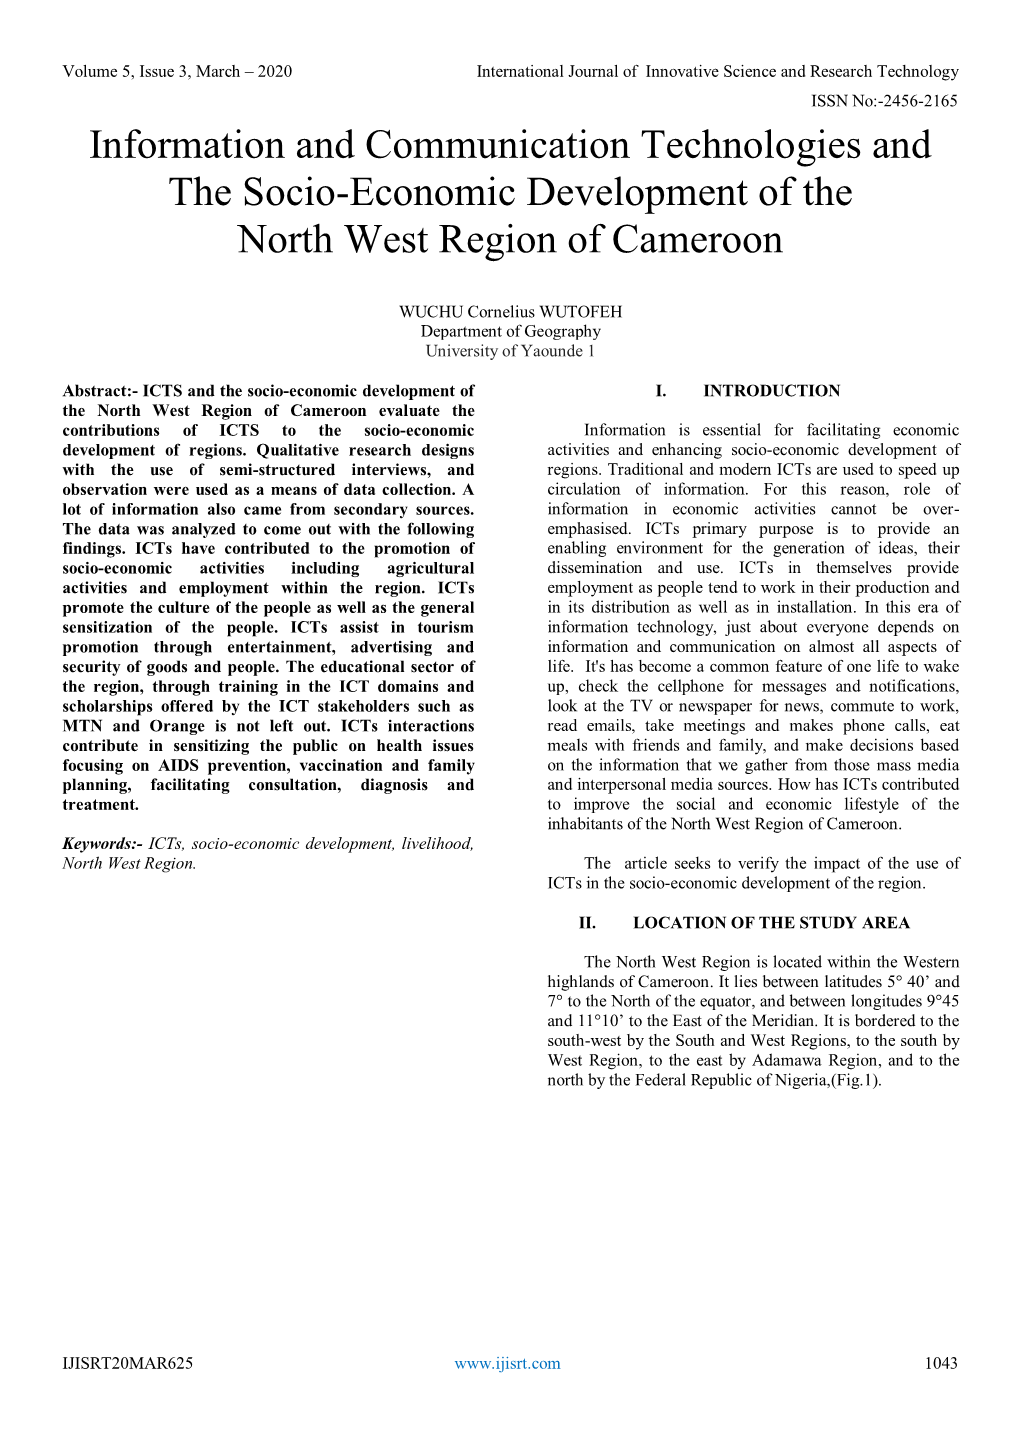 Information and Communication Technologies and the Socio-Economic Development of the North West Region of Cameroon